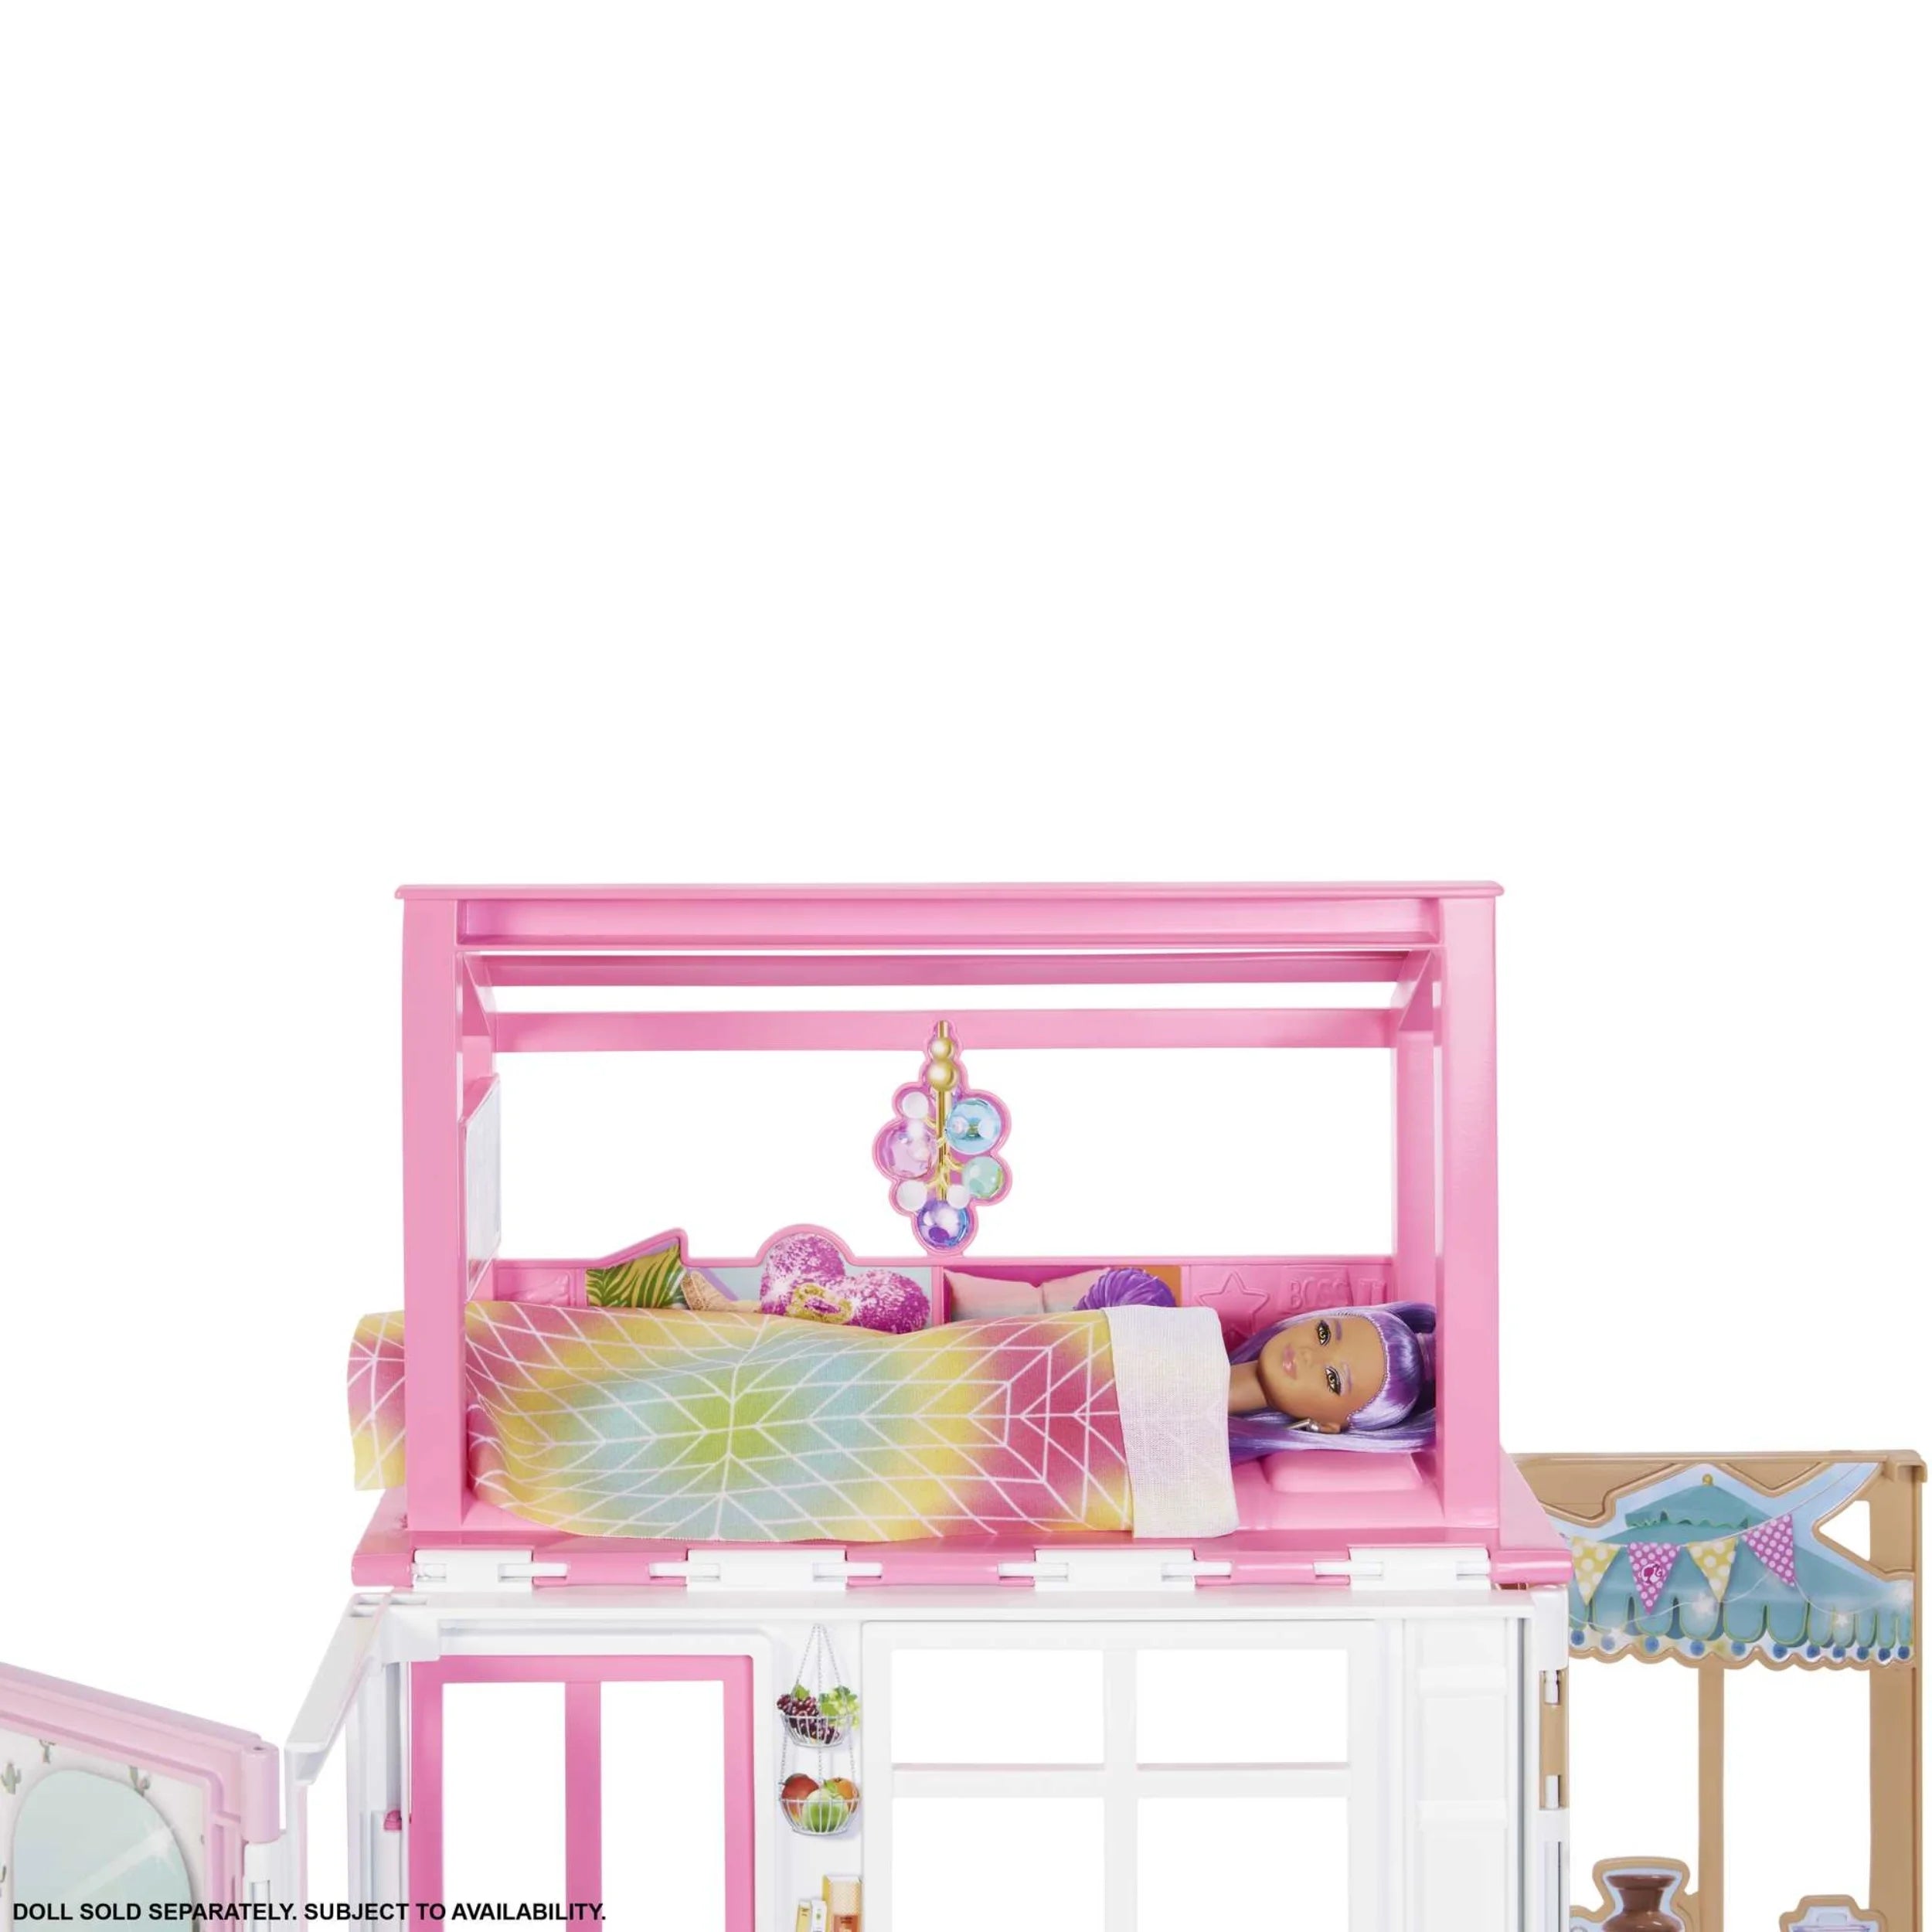 Mattel - Barbie Dollhouse With 2 Levels & 4 Play Areas